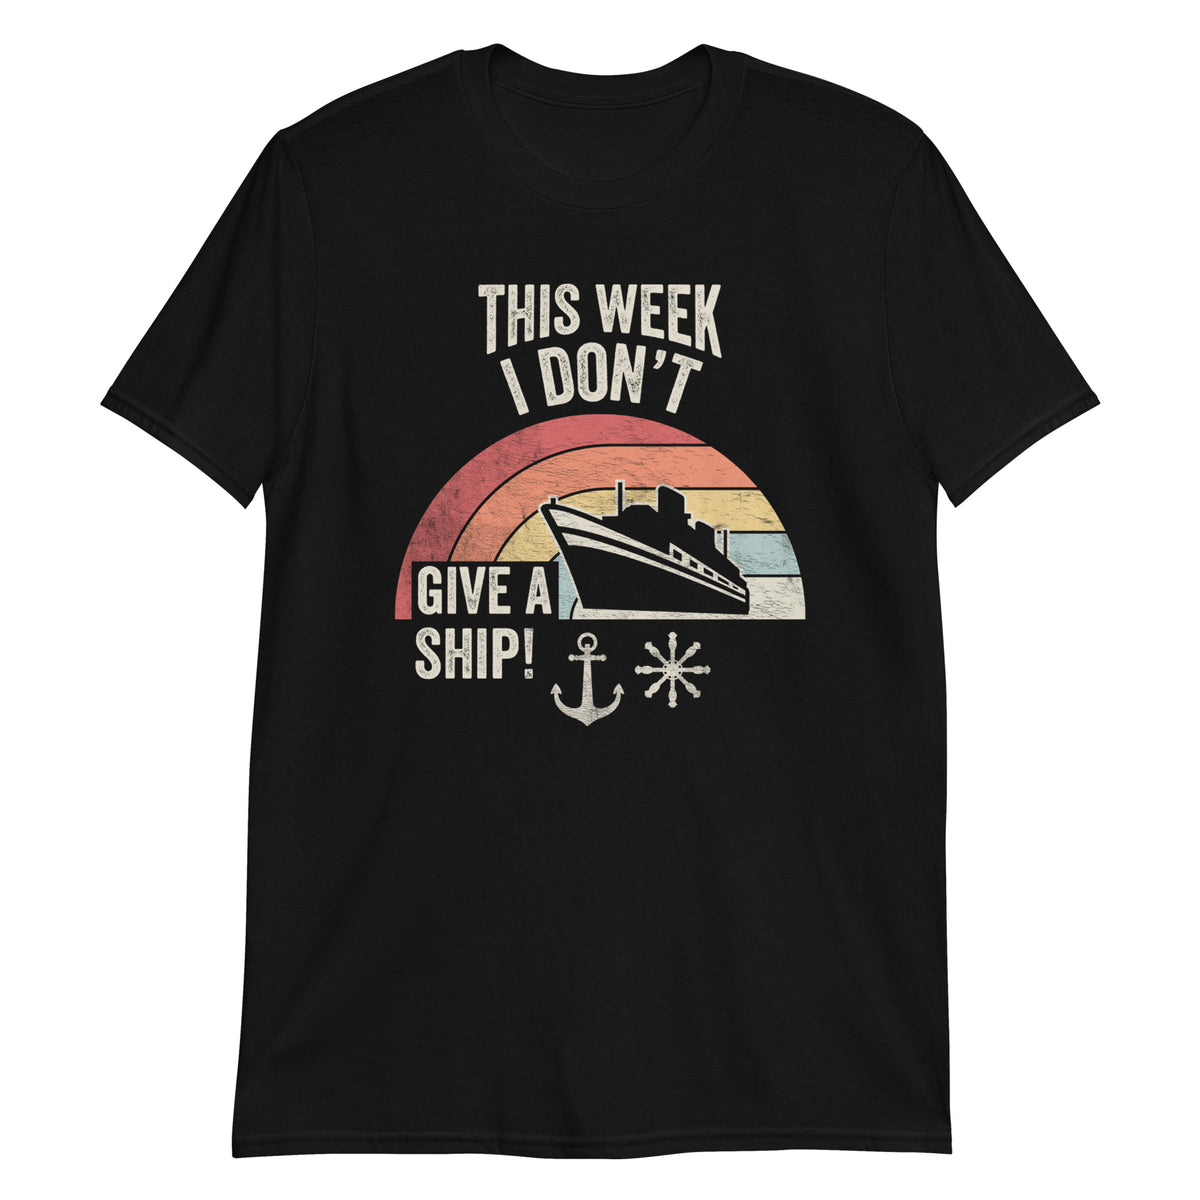 This Week I Don't Give a Ship T-Shirt